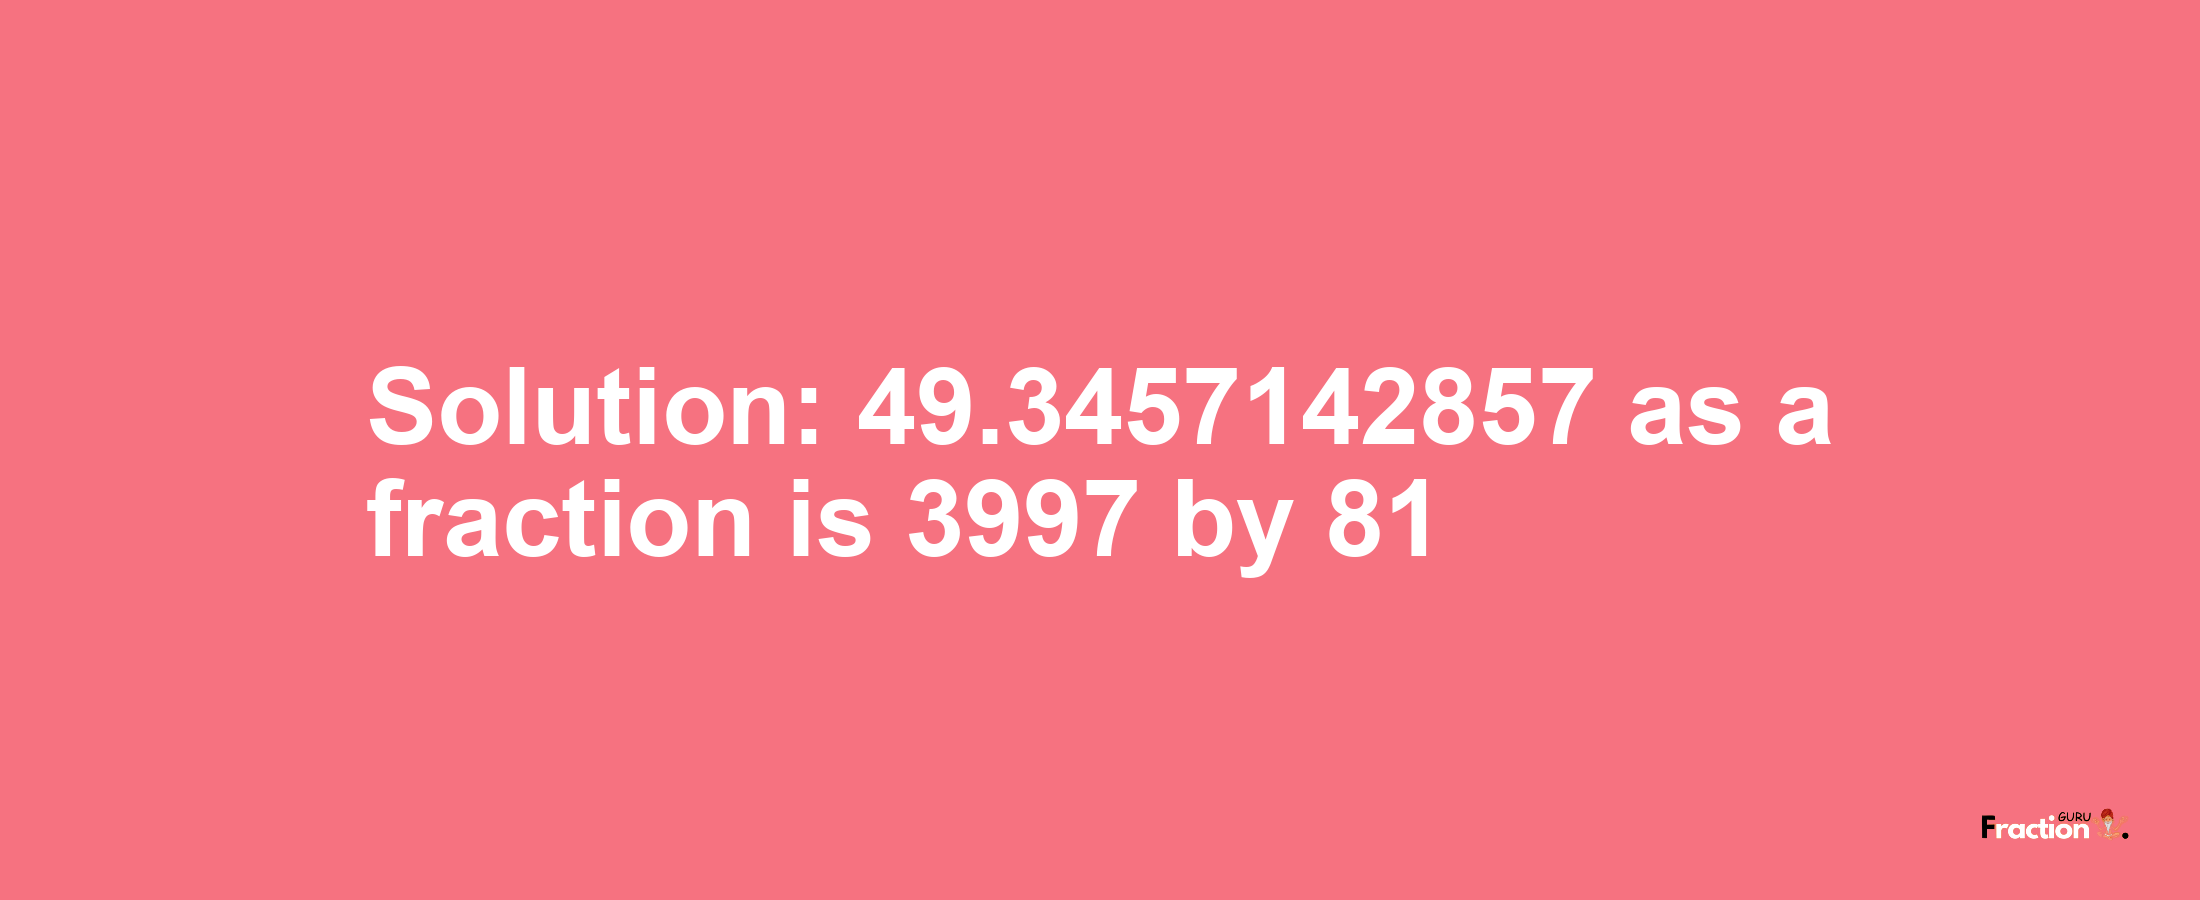 Solution:49.3457142857 as a fraction is 3997/81